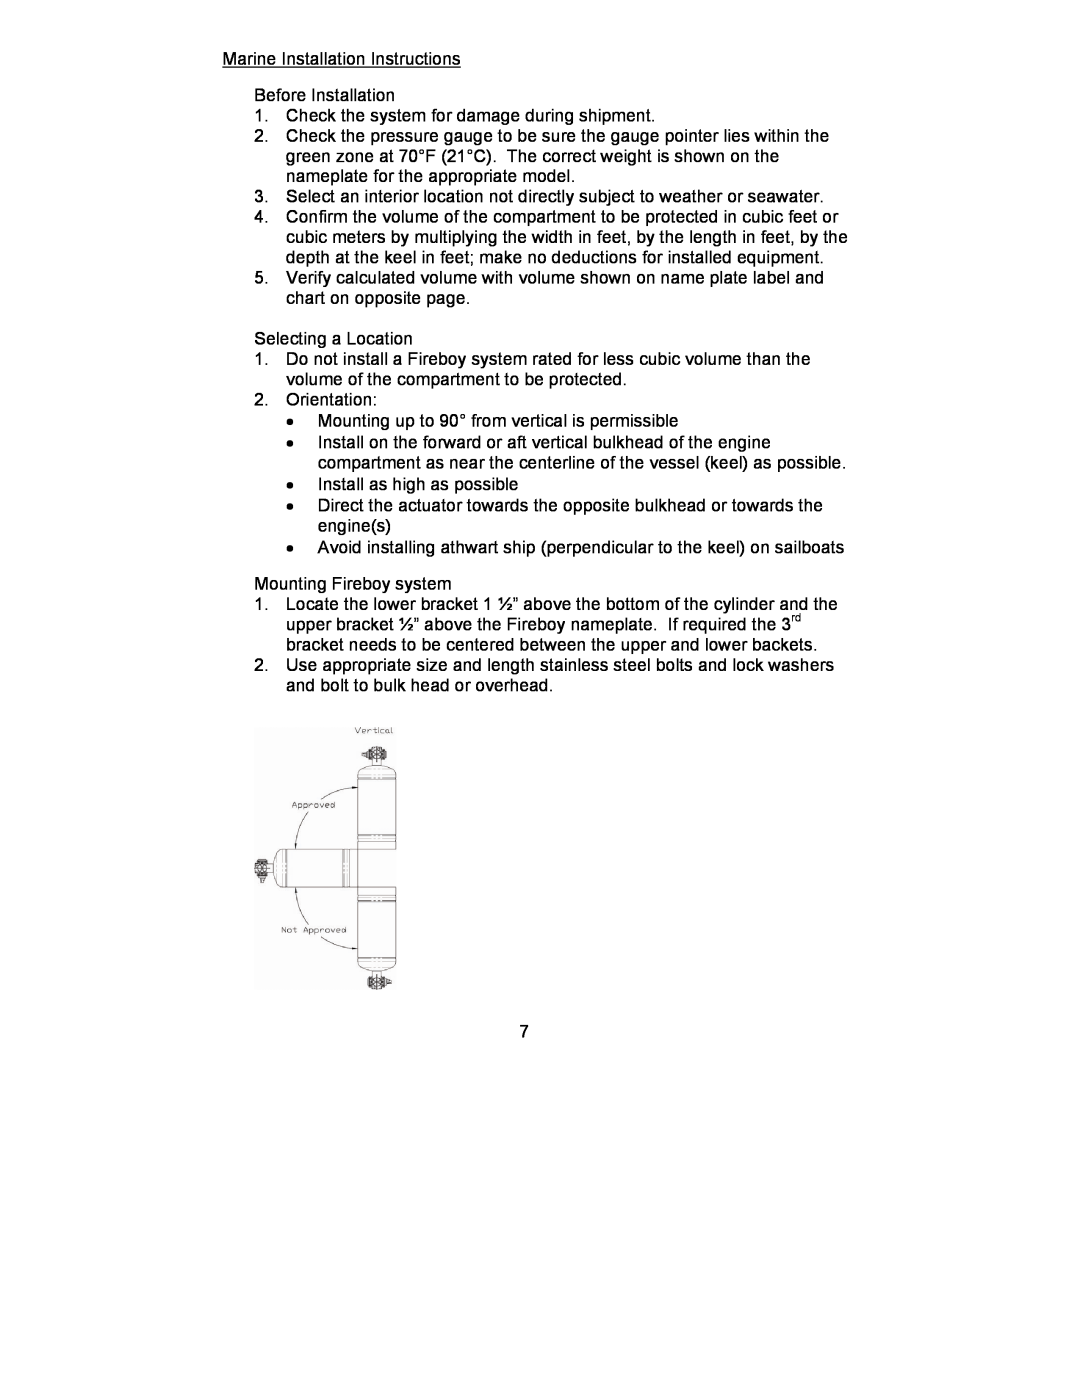 Fireboy- Xintex, LTD CG2 Marine Installation Instructions Before Installation, Check the system for damage during shipment 